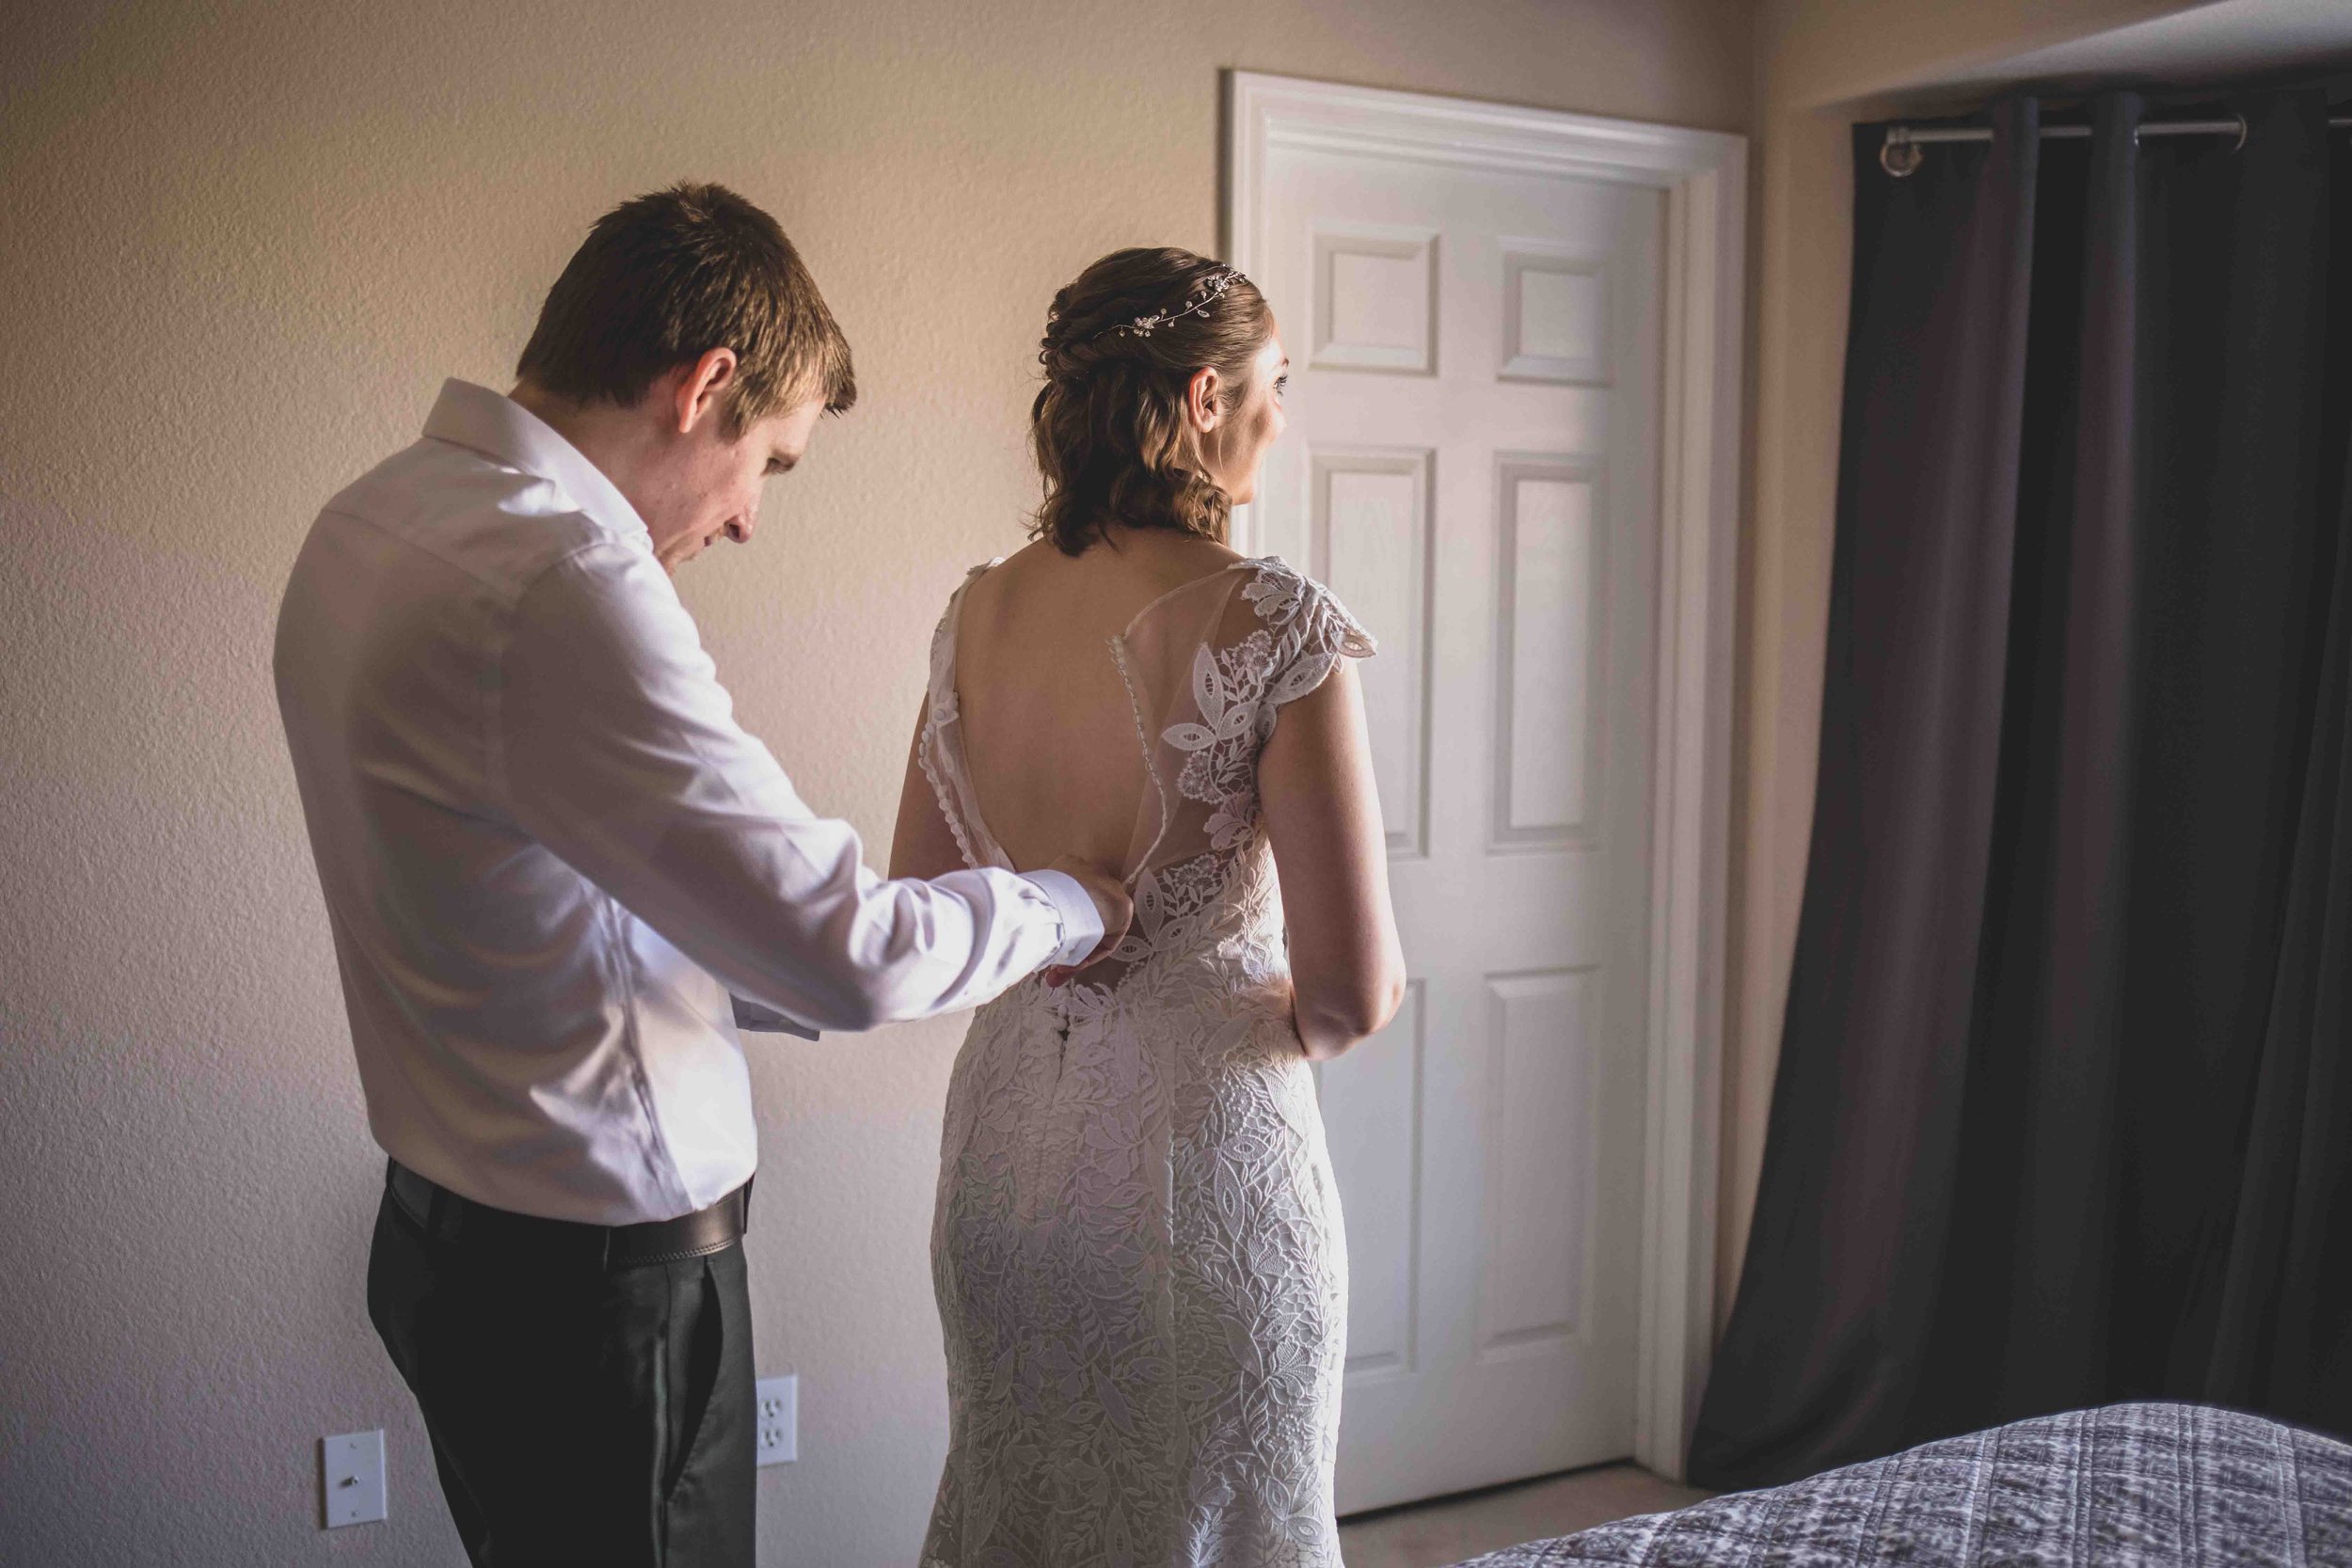  Bride and Groom getting ready together for their wedding day at home by Gilbert Wedding Photographer Jennifer Lind Schutsky. 